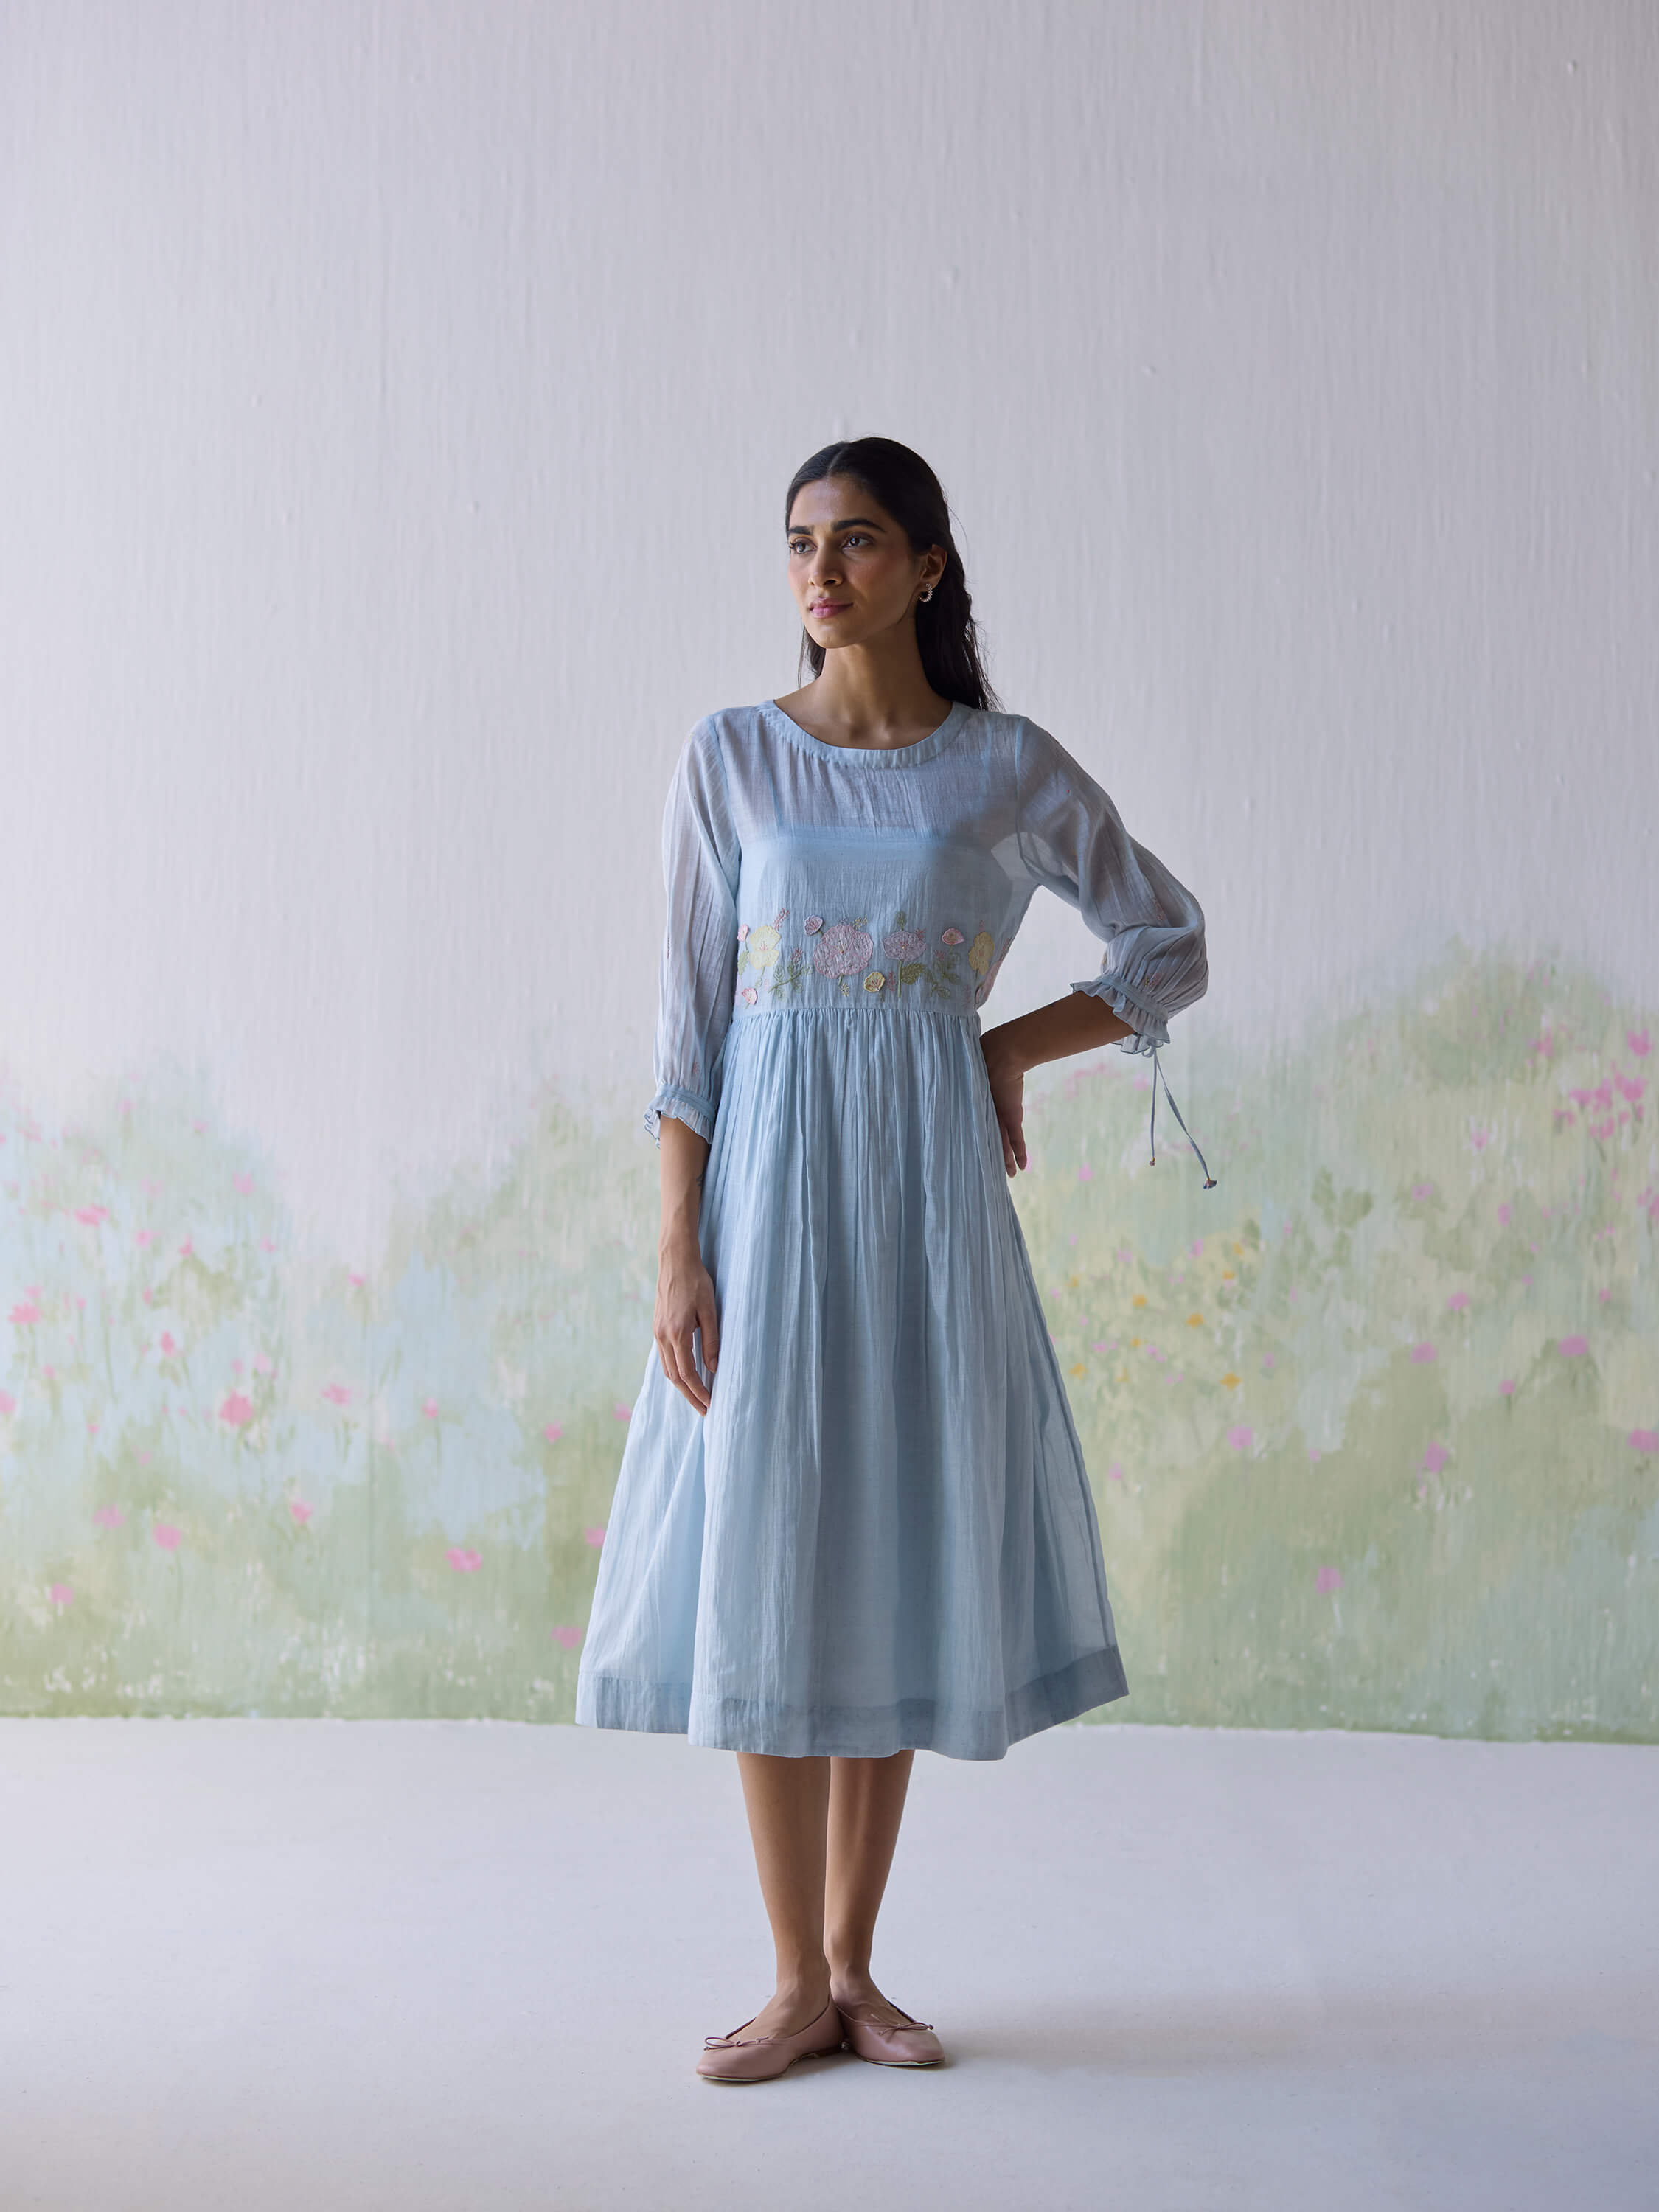 Woman in light blue dress with floral embroidery.